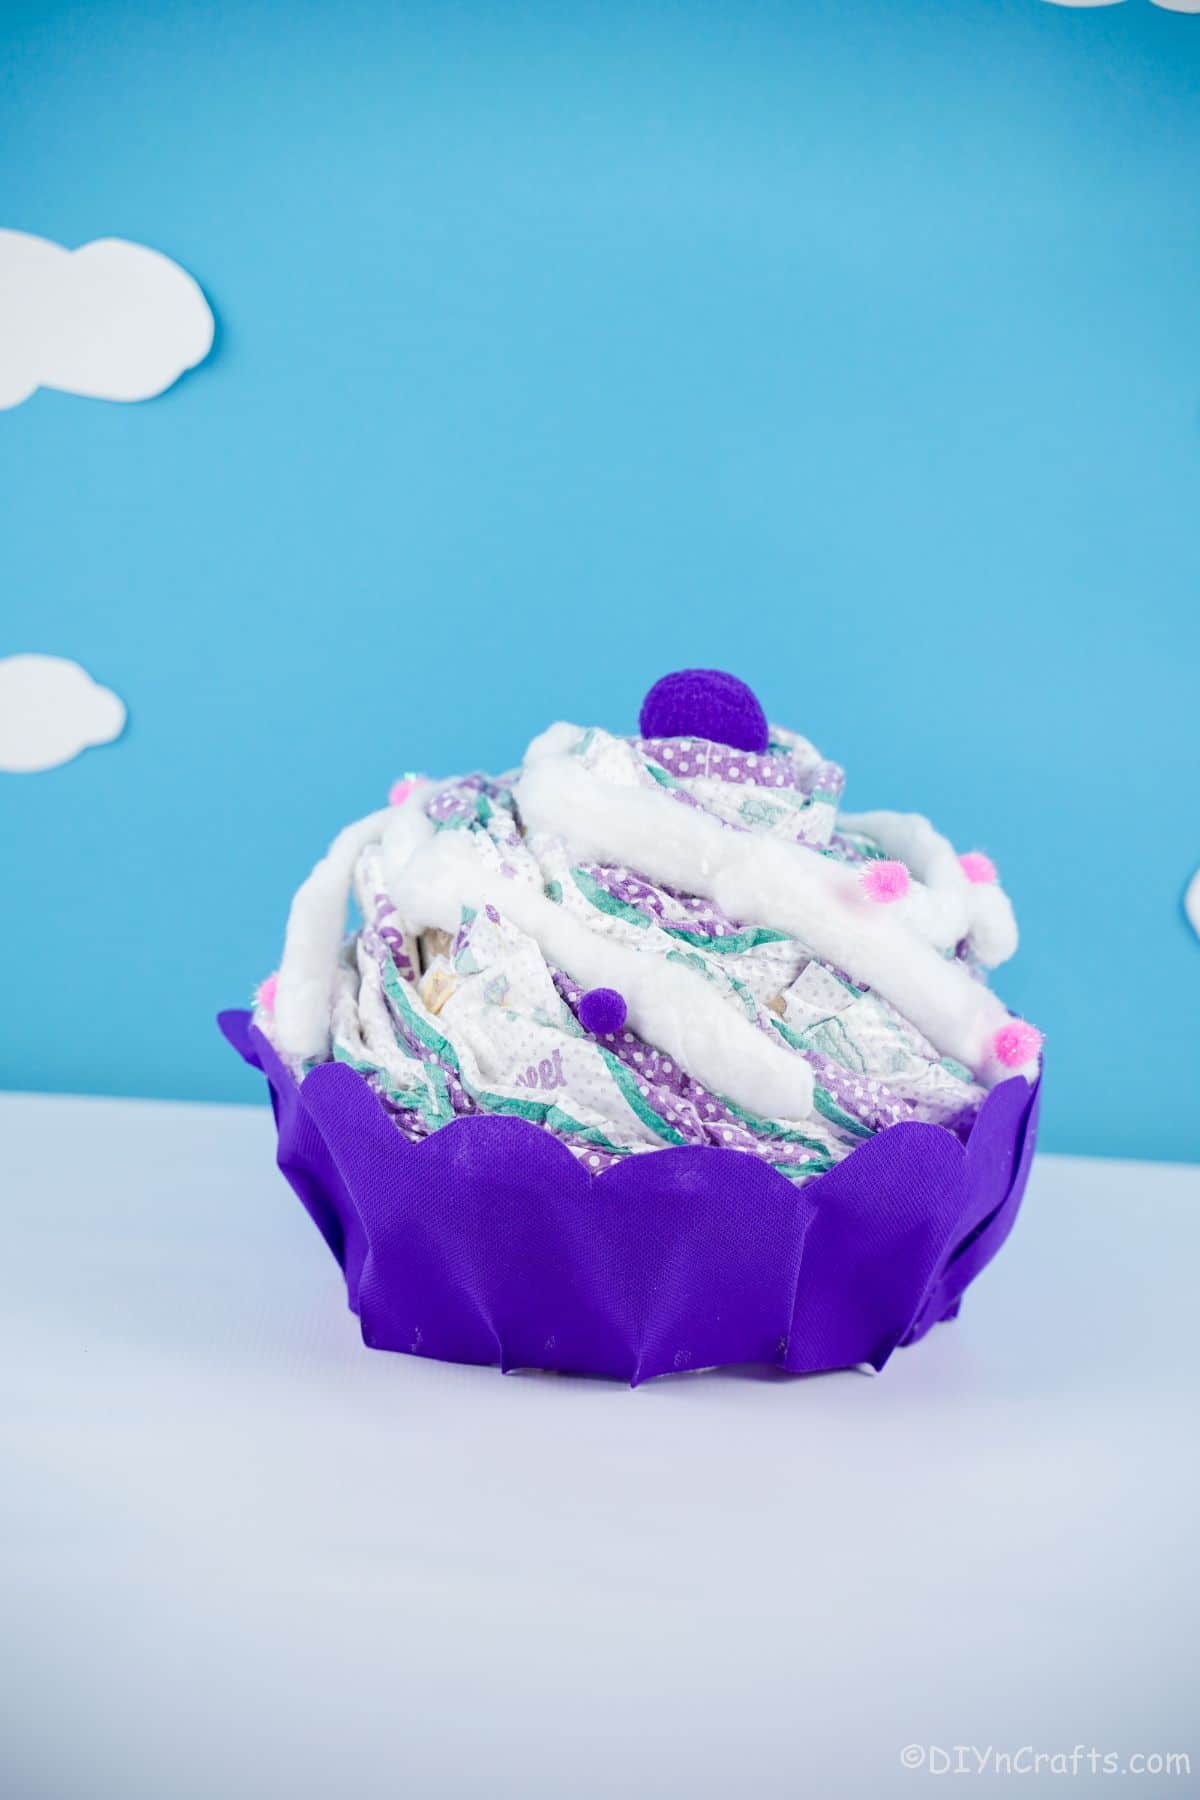 cupcake diaper cake in front of blue background